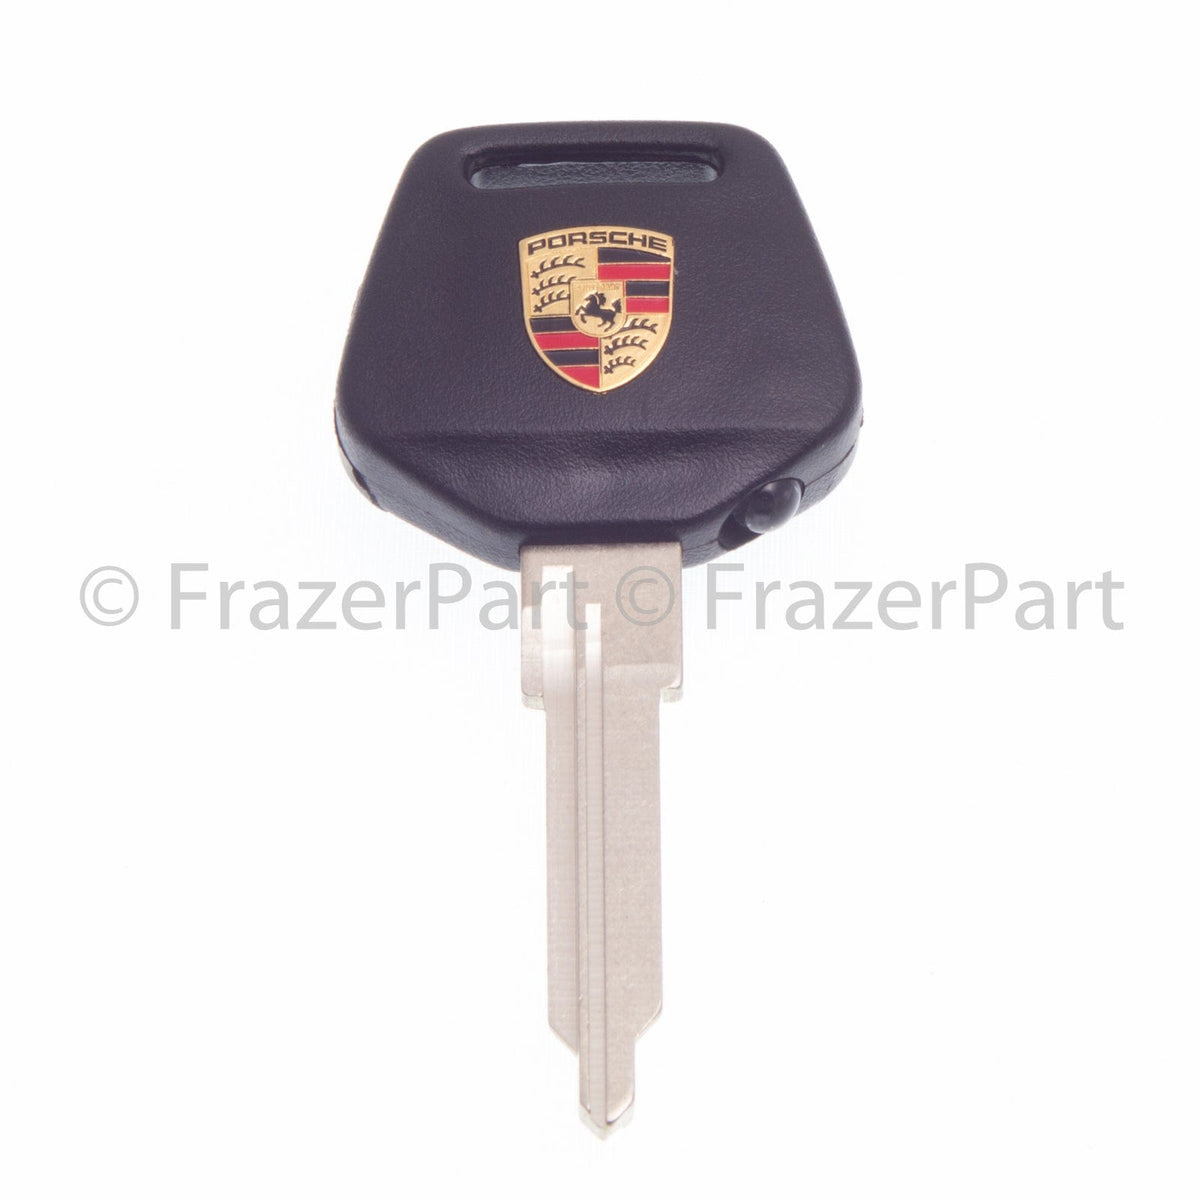 911, 964, 993 Porsche crested key head with light and blank key blade